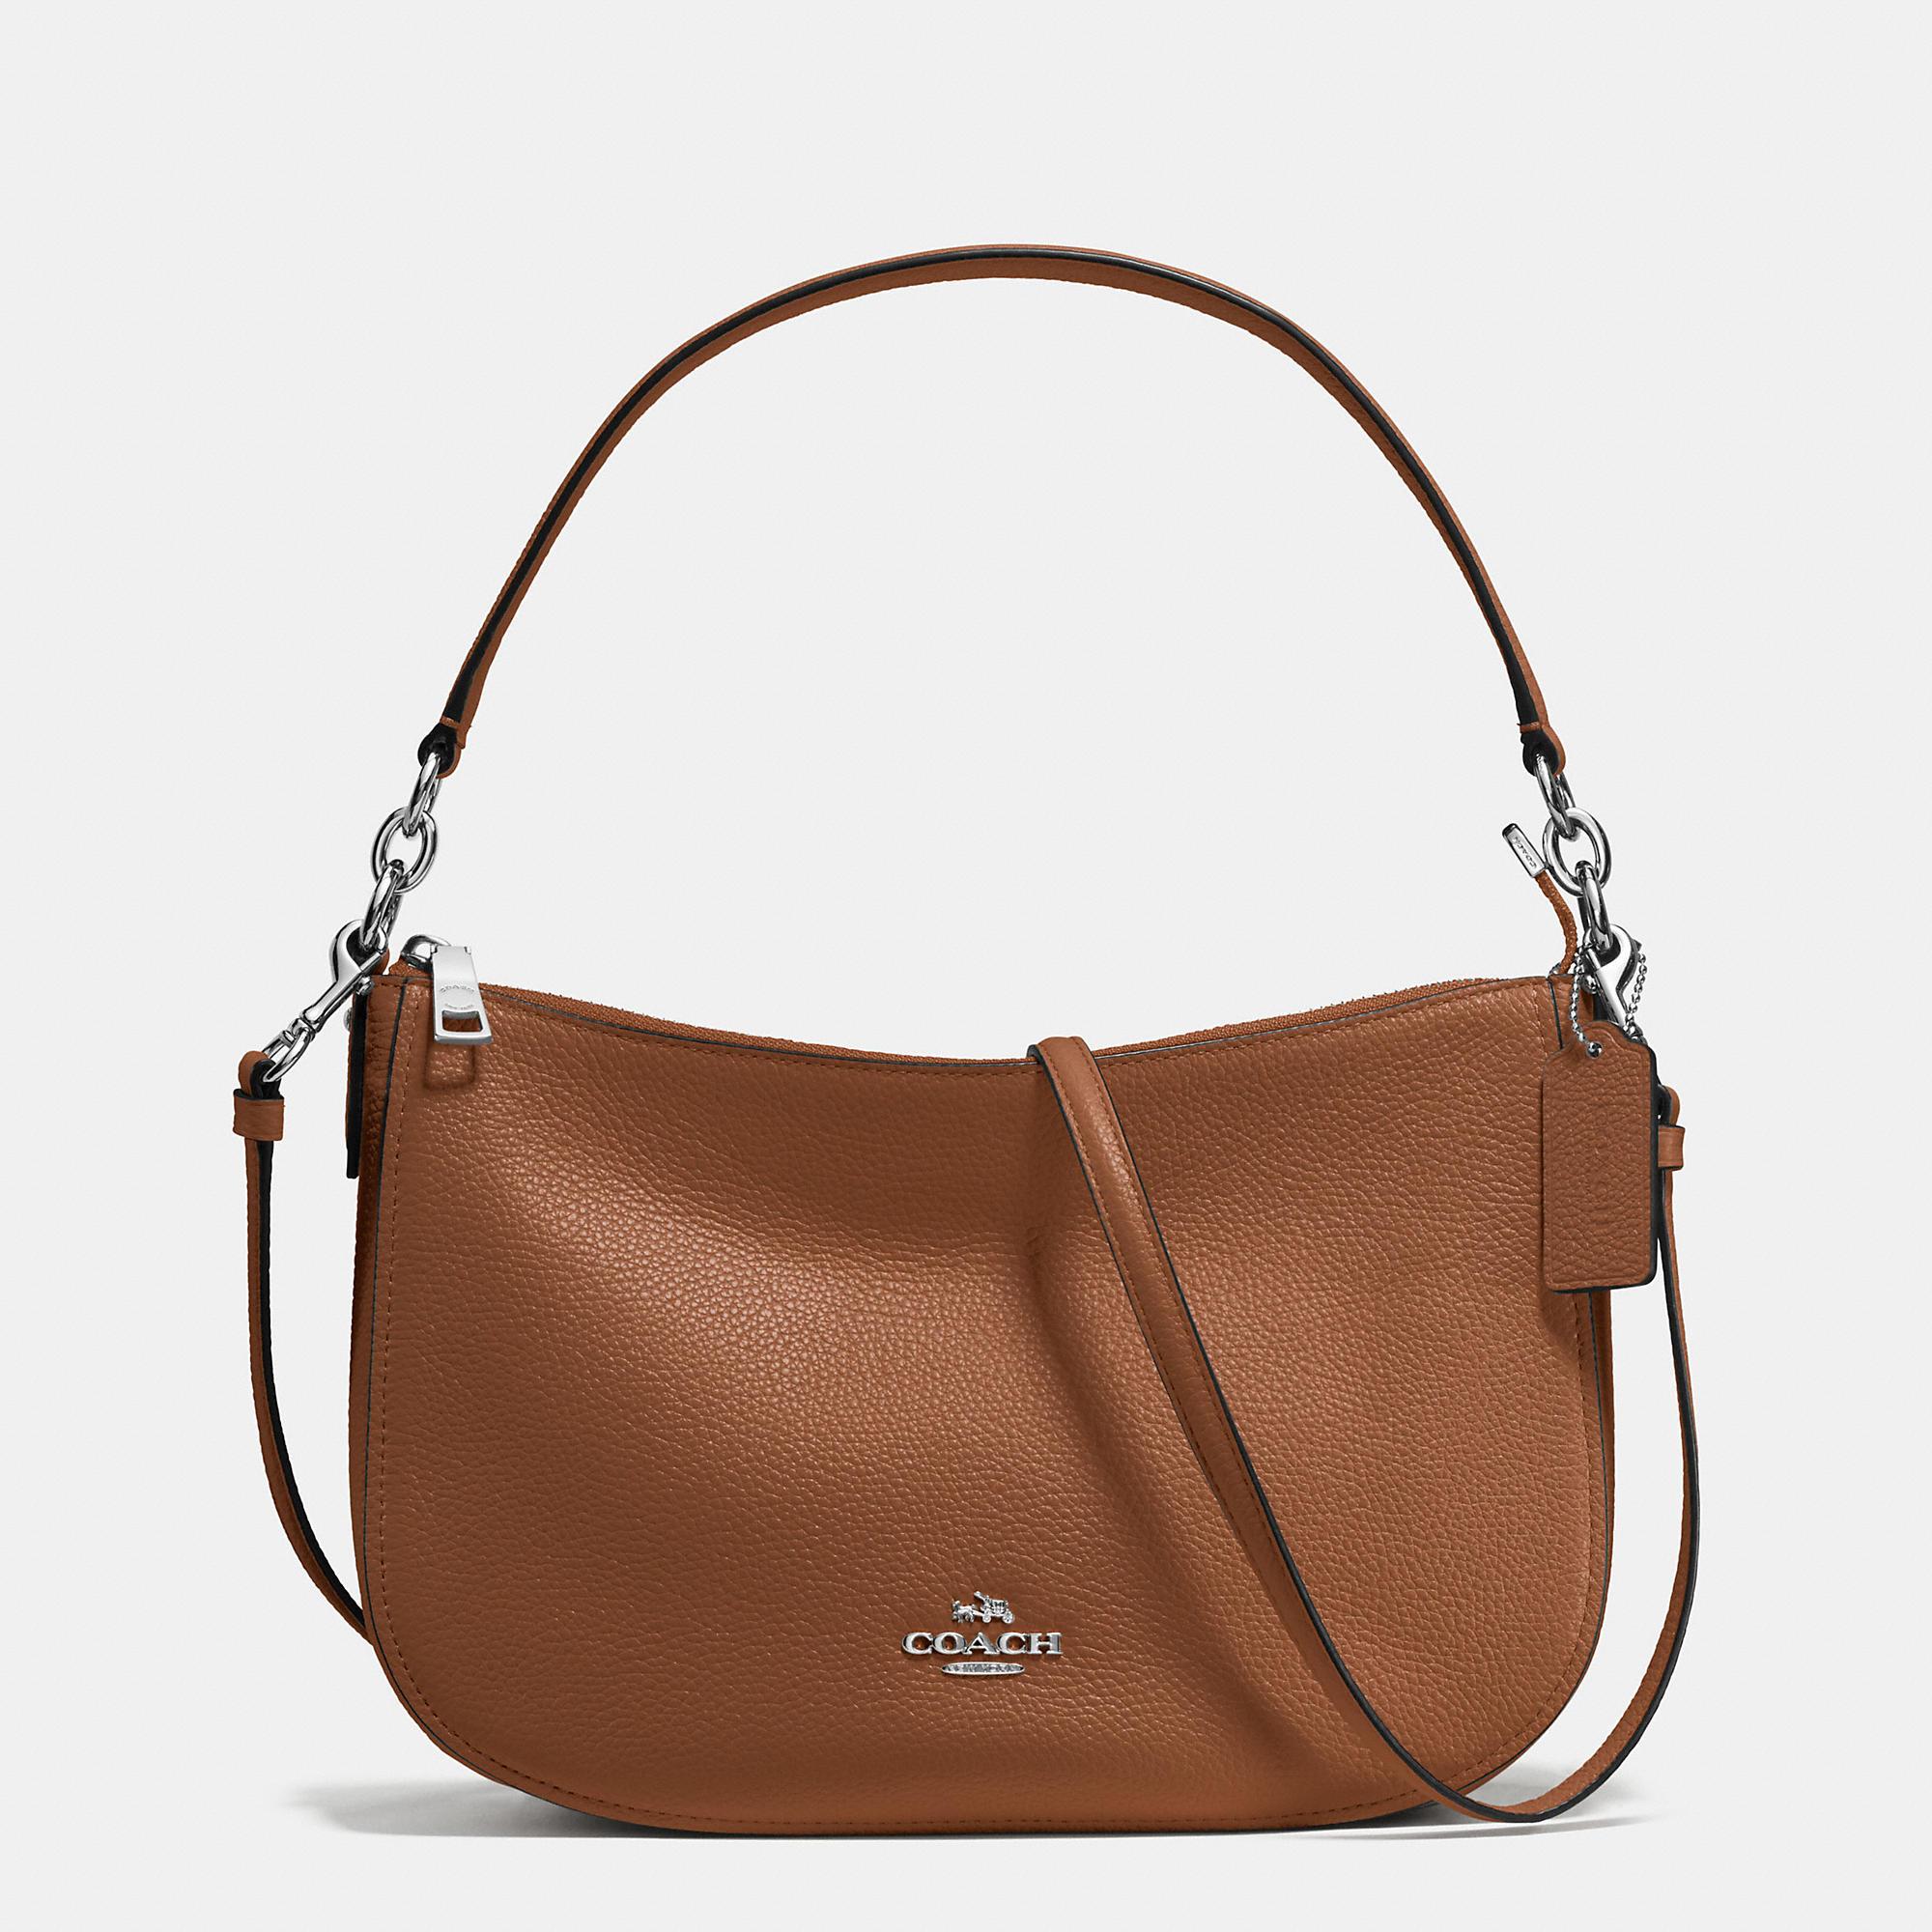 Lyst - Coach Chelsea Crossbody In Polished Pebble Leather in Metallic